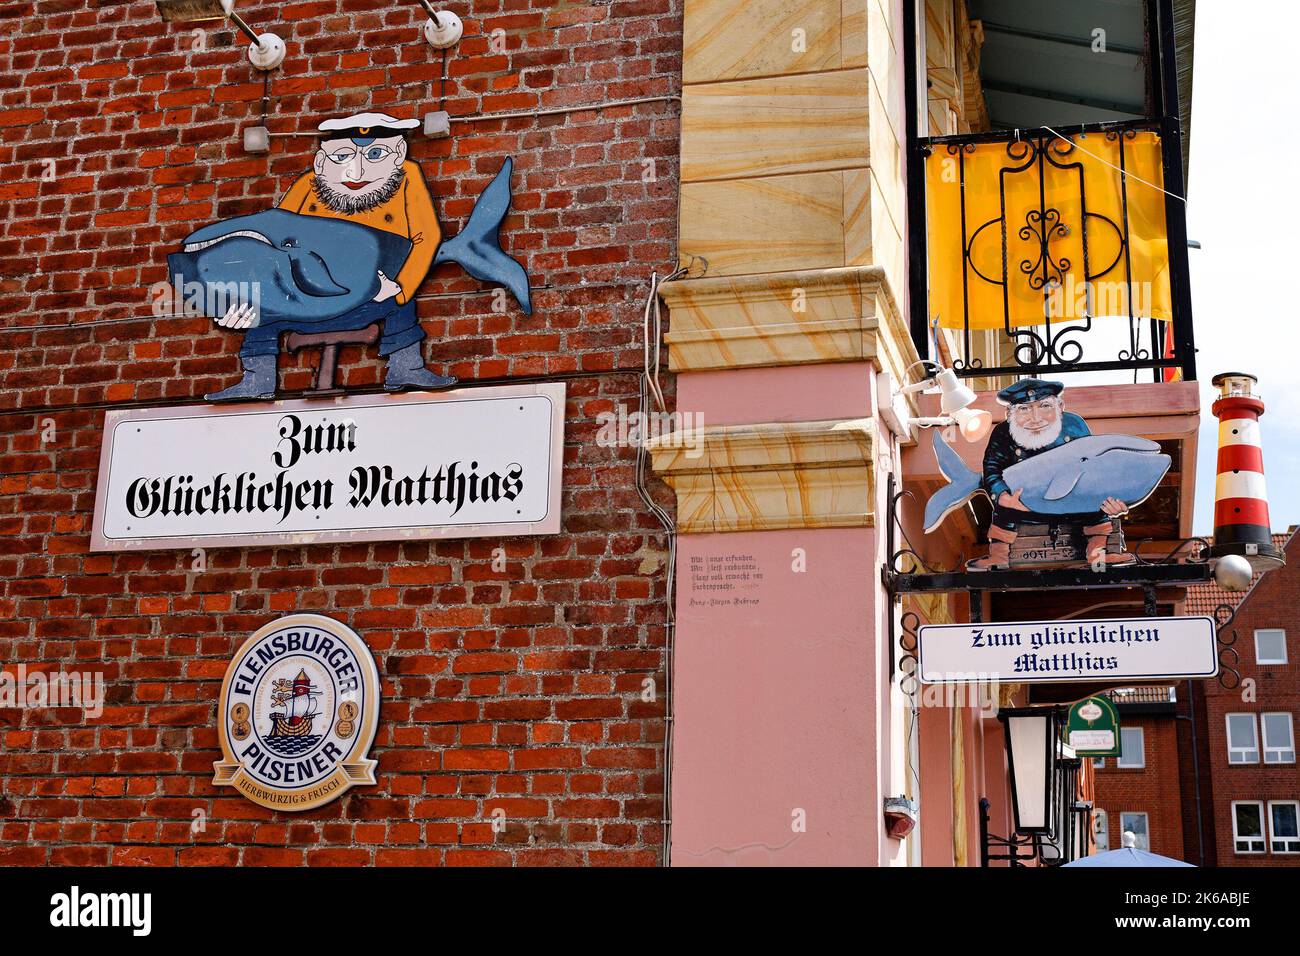 Signs of Seafood Restaurant on red brick wall, Wyk, Fohr, North Frisian Islands, Germany Stock Photo